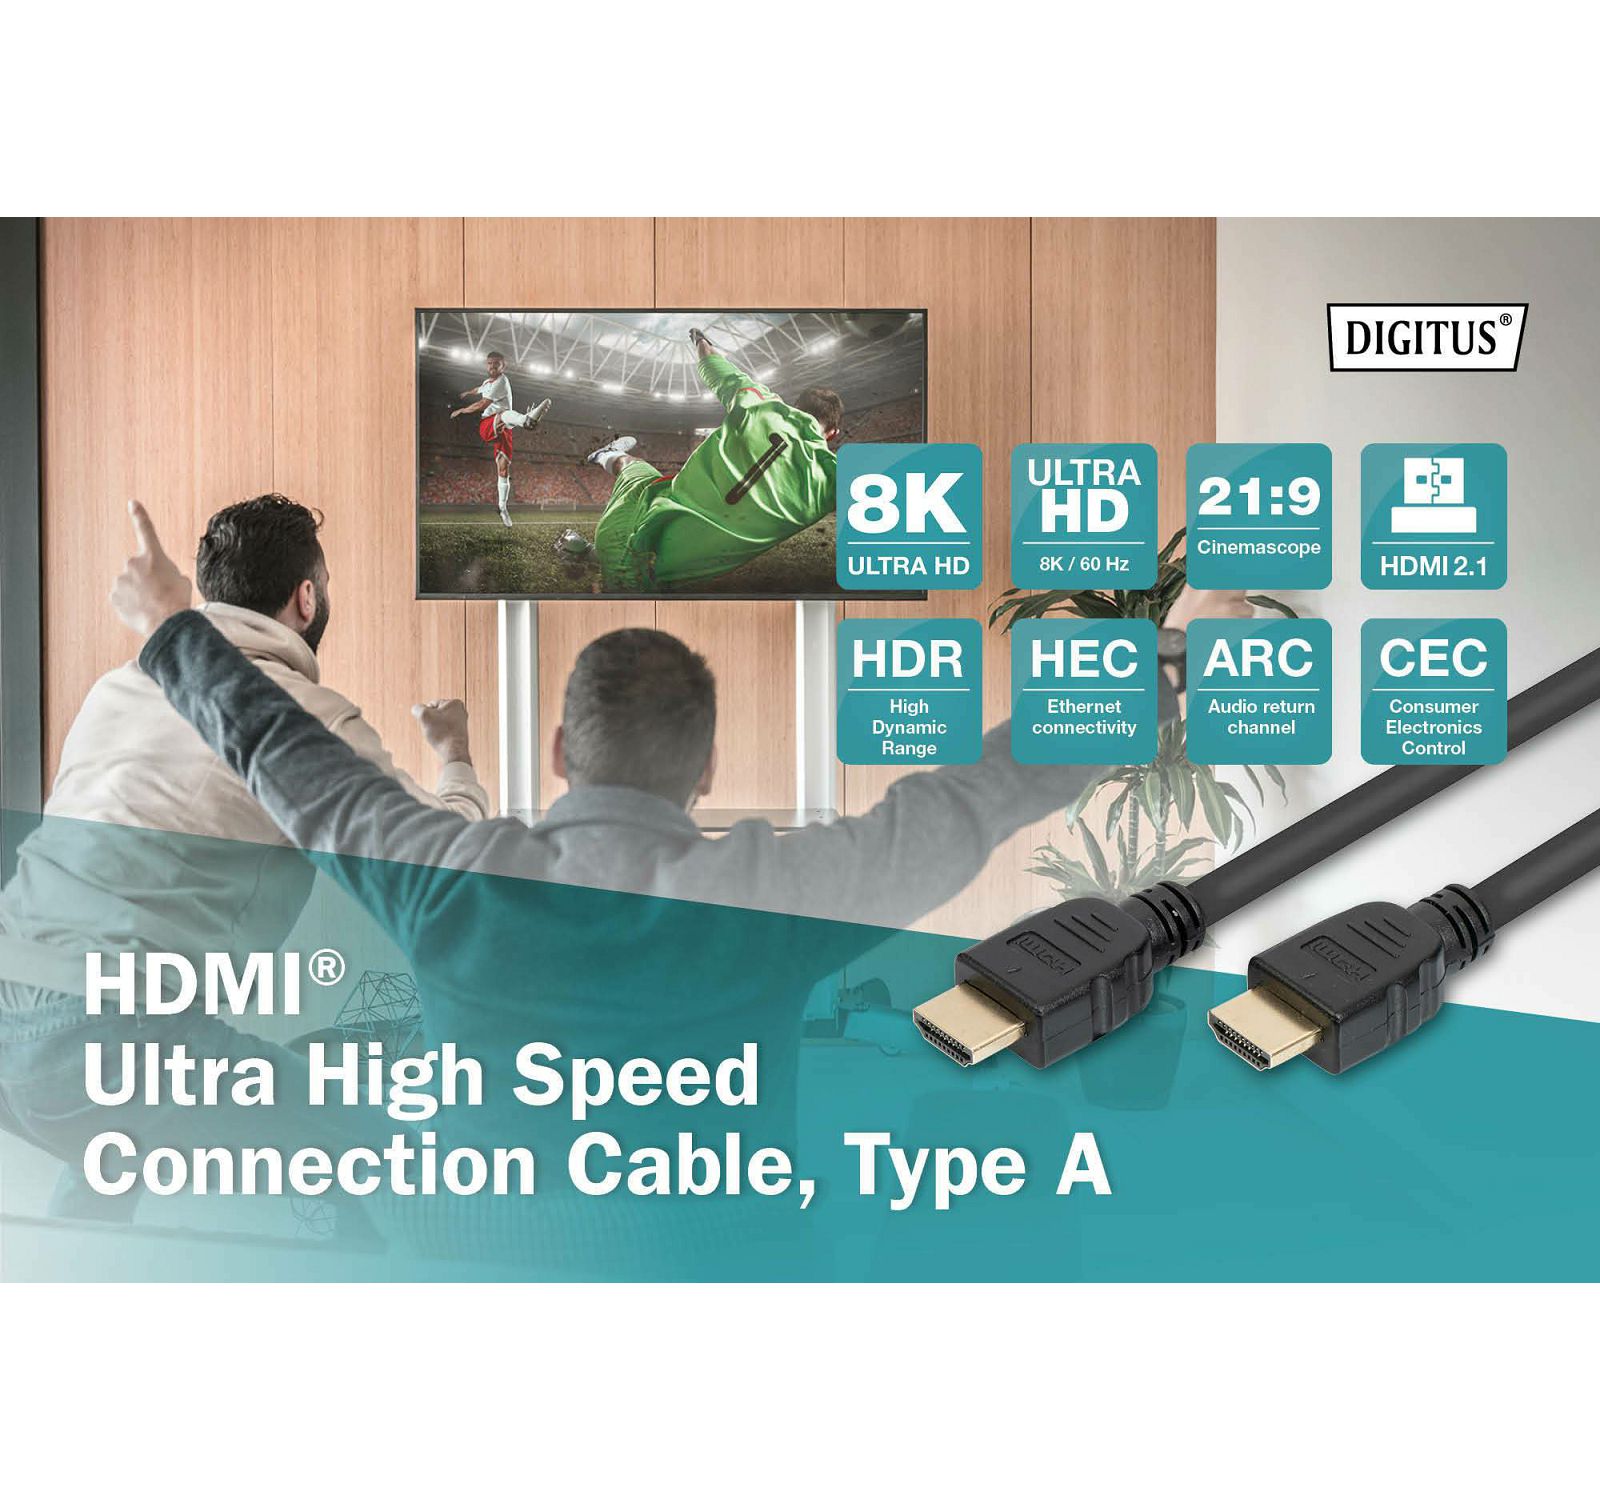 Digitus HDMI Ultra High Speed connection cable type A UHD 8K 60p kabel 5m